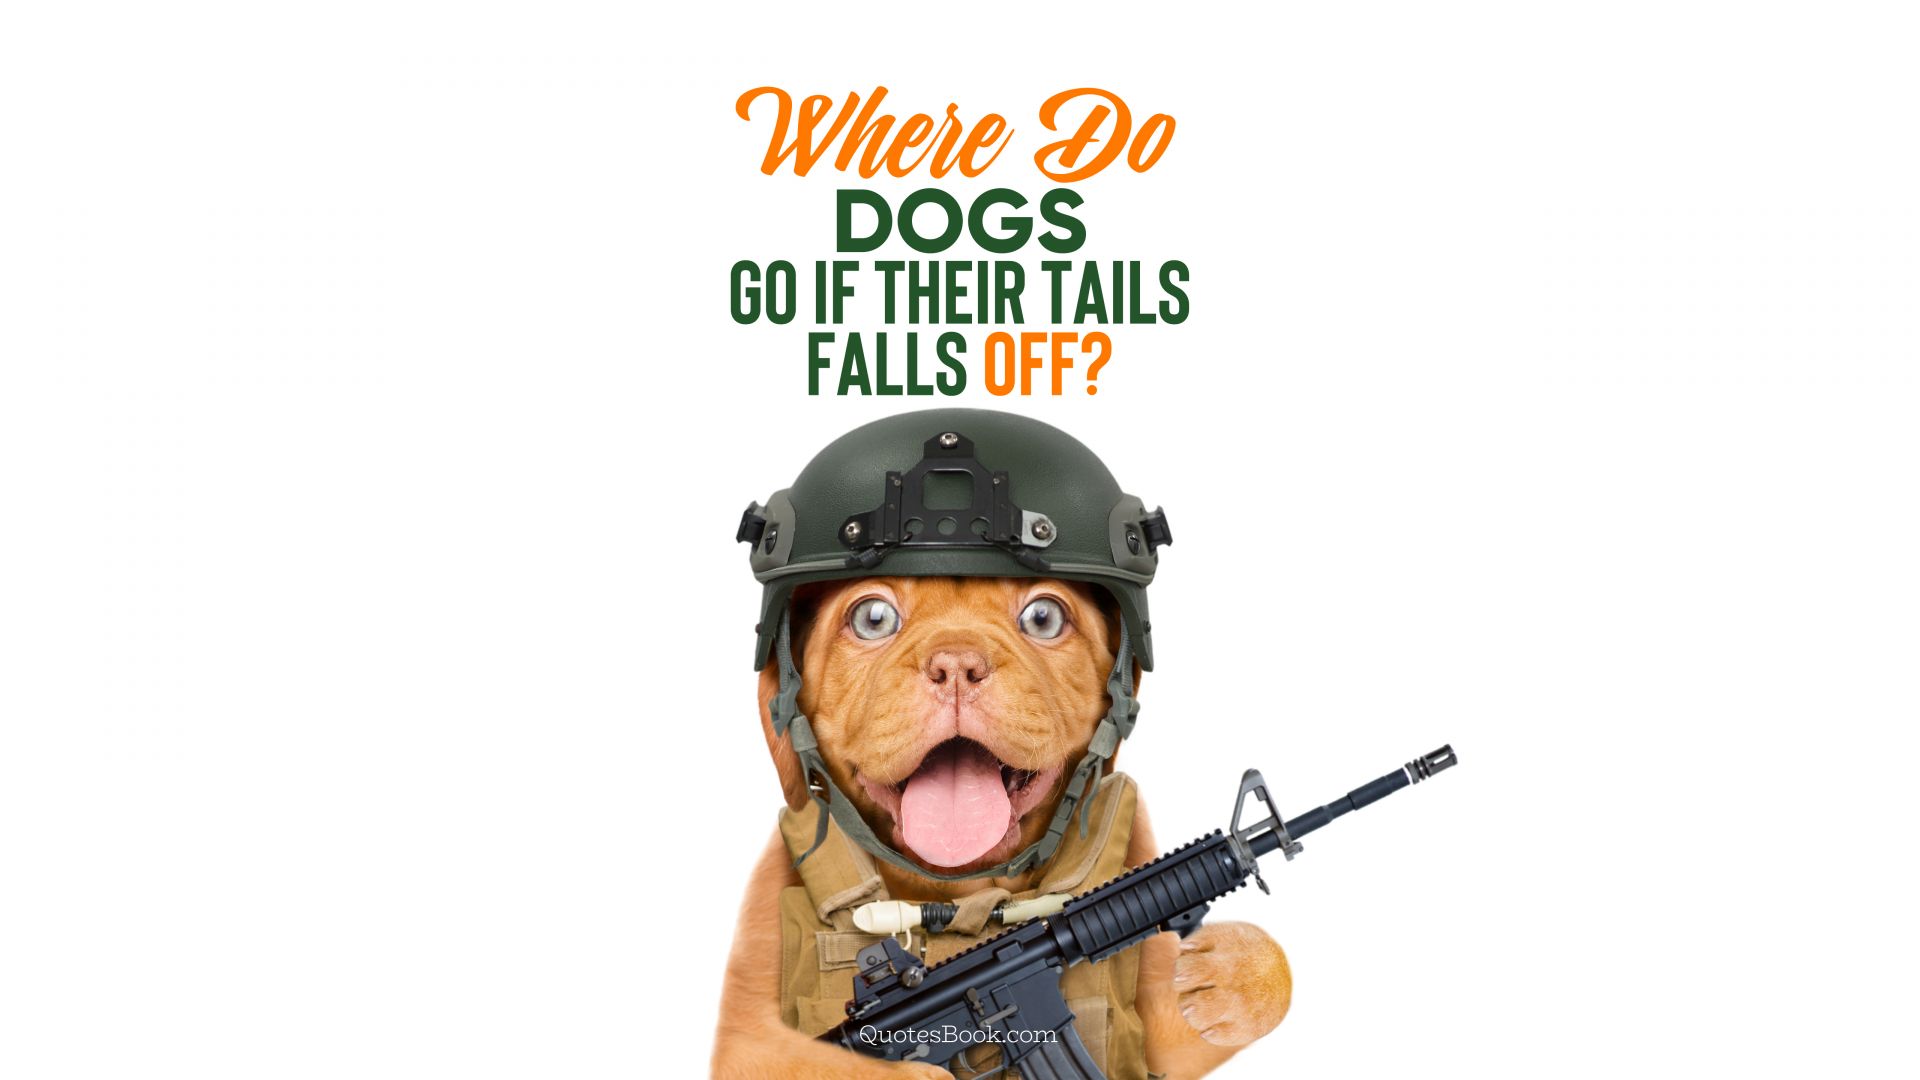 Where do dogs go if their tails falls off?